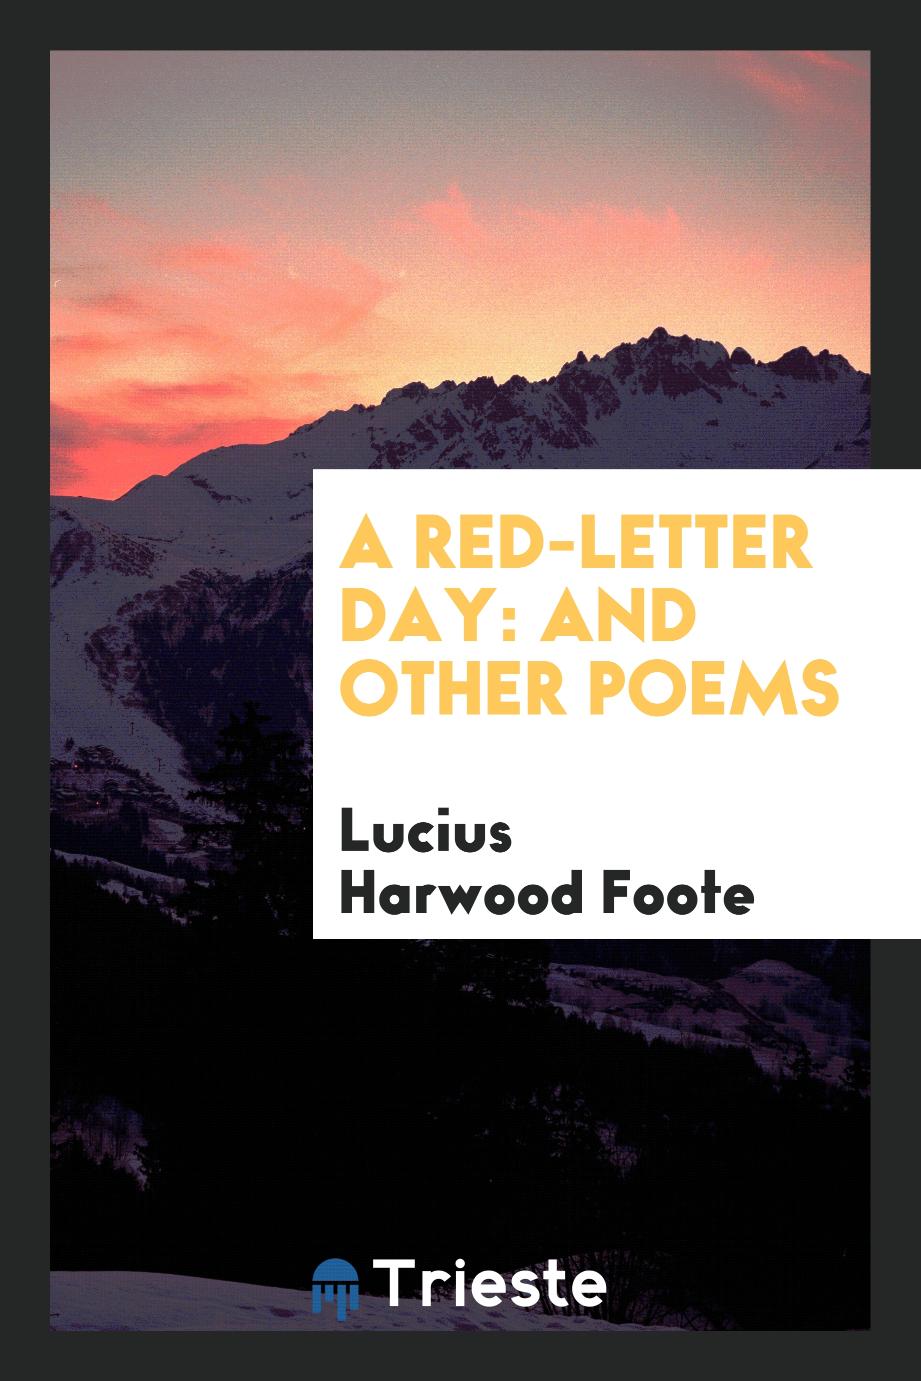 A Red-Letter Day: And Other Poems